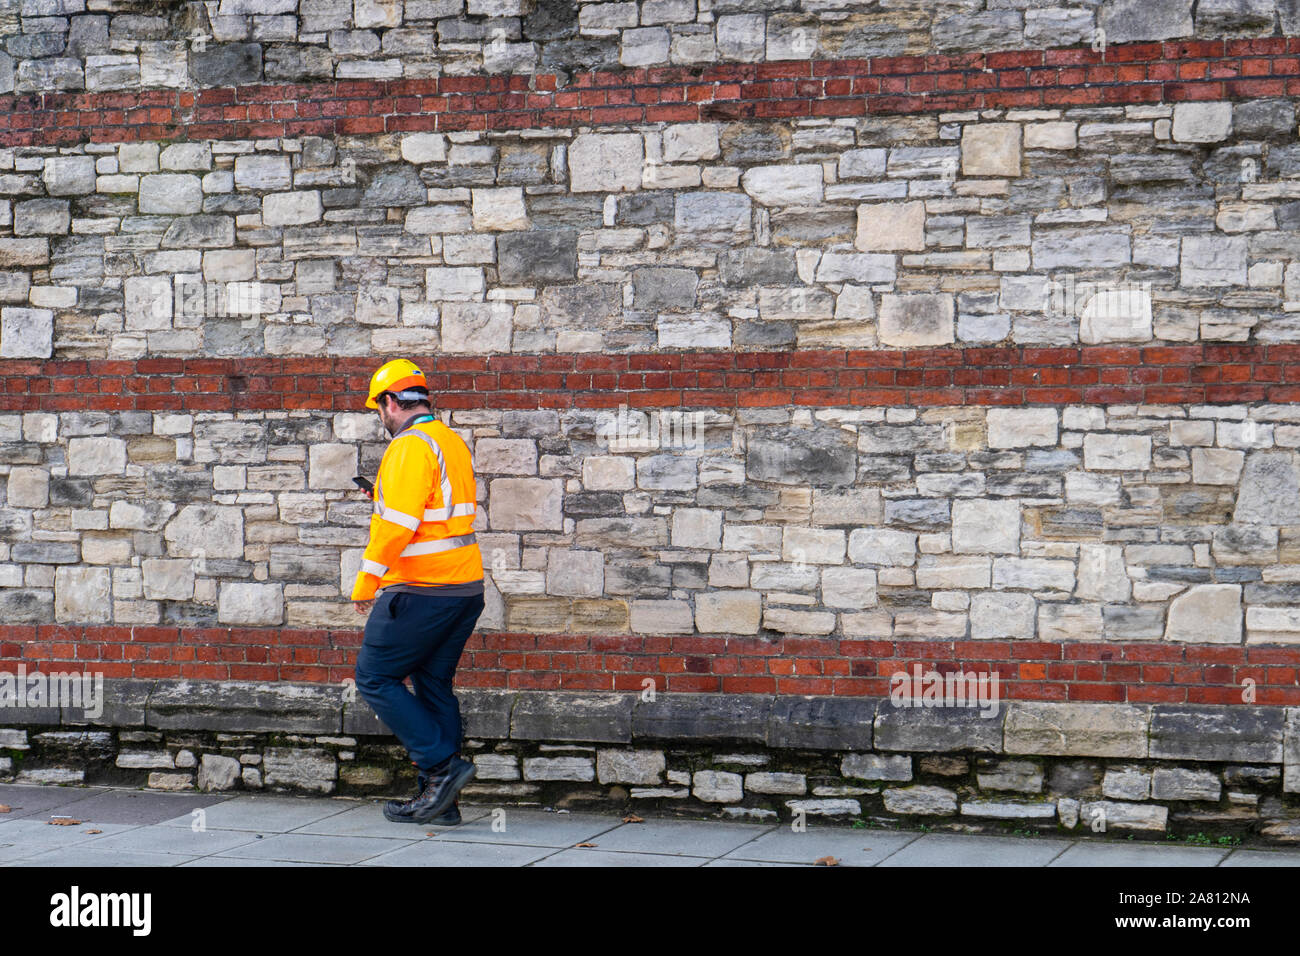 a builder or construction worker wearing high visibility clothing and a hard hat walking Stock Photo